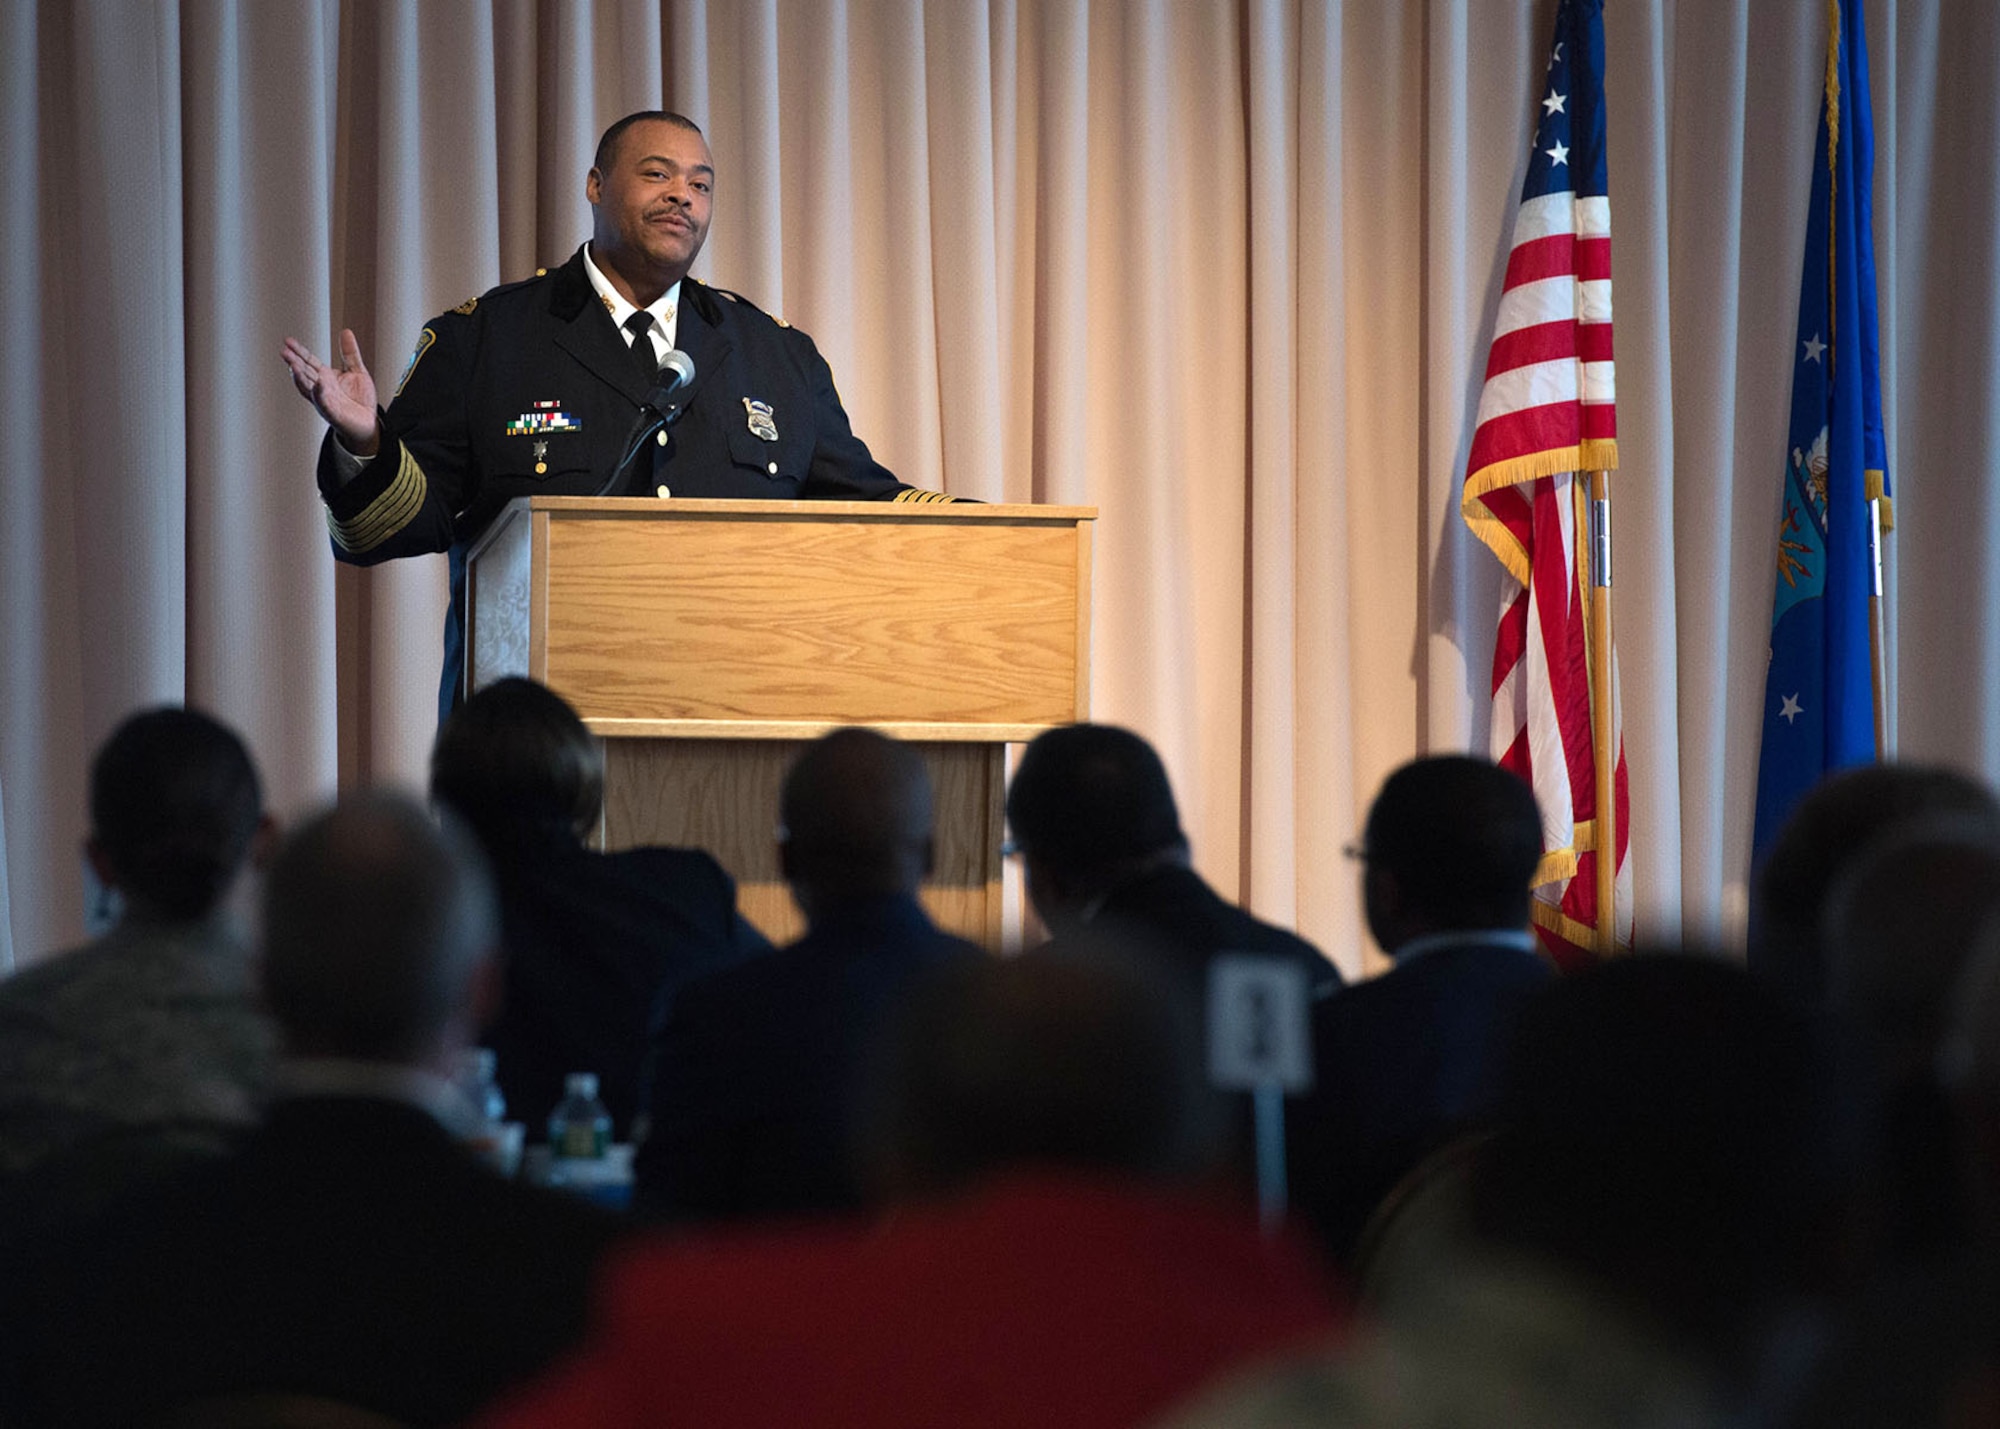 Boston Police Department Superintendent-in-Chief William G. Gross speaks during a Dr. Martin Luther King, Jr., observance event at the Minuteman Commons Jan. 30. Gross offered some historical and first-person insights during the event that was rescheduled from earlier in the month. (U.S. Air Force photo by Jerry Saslav)